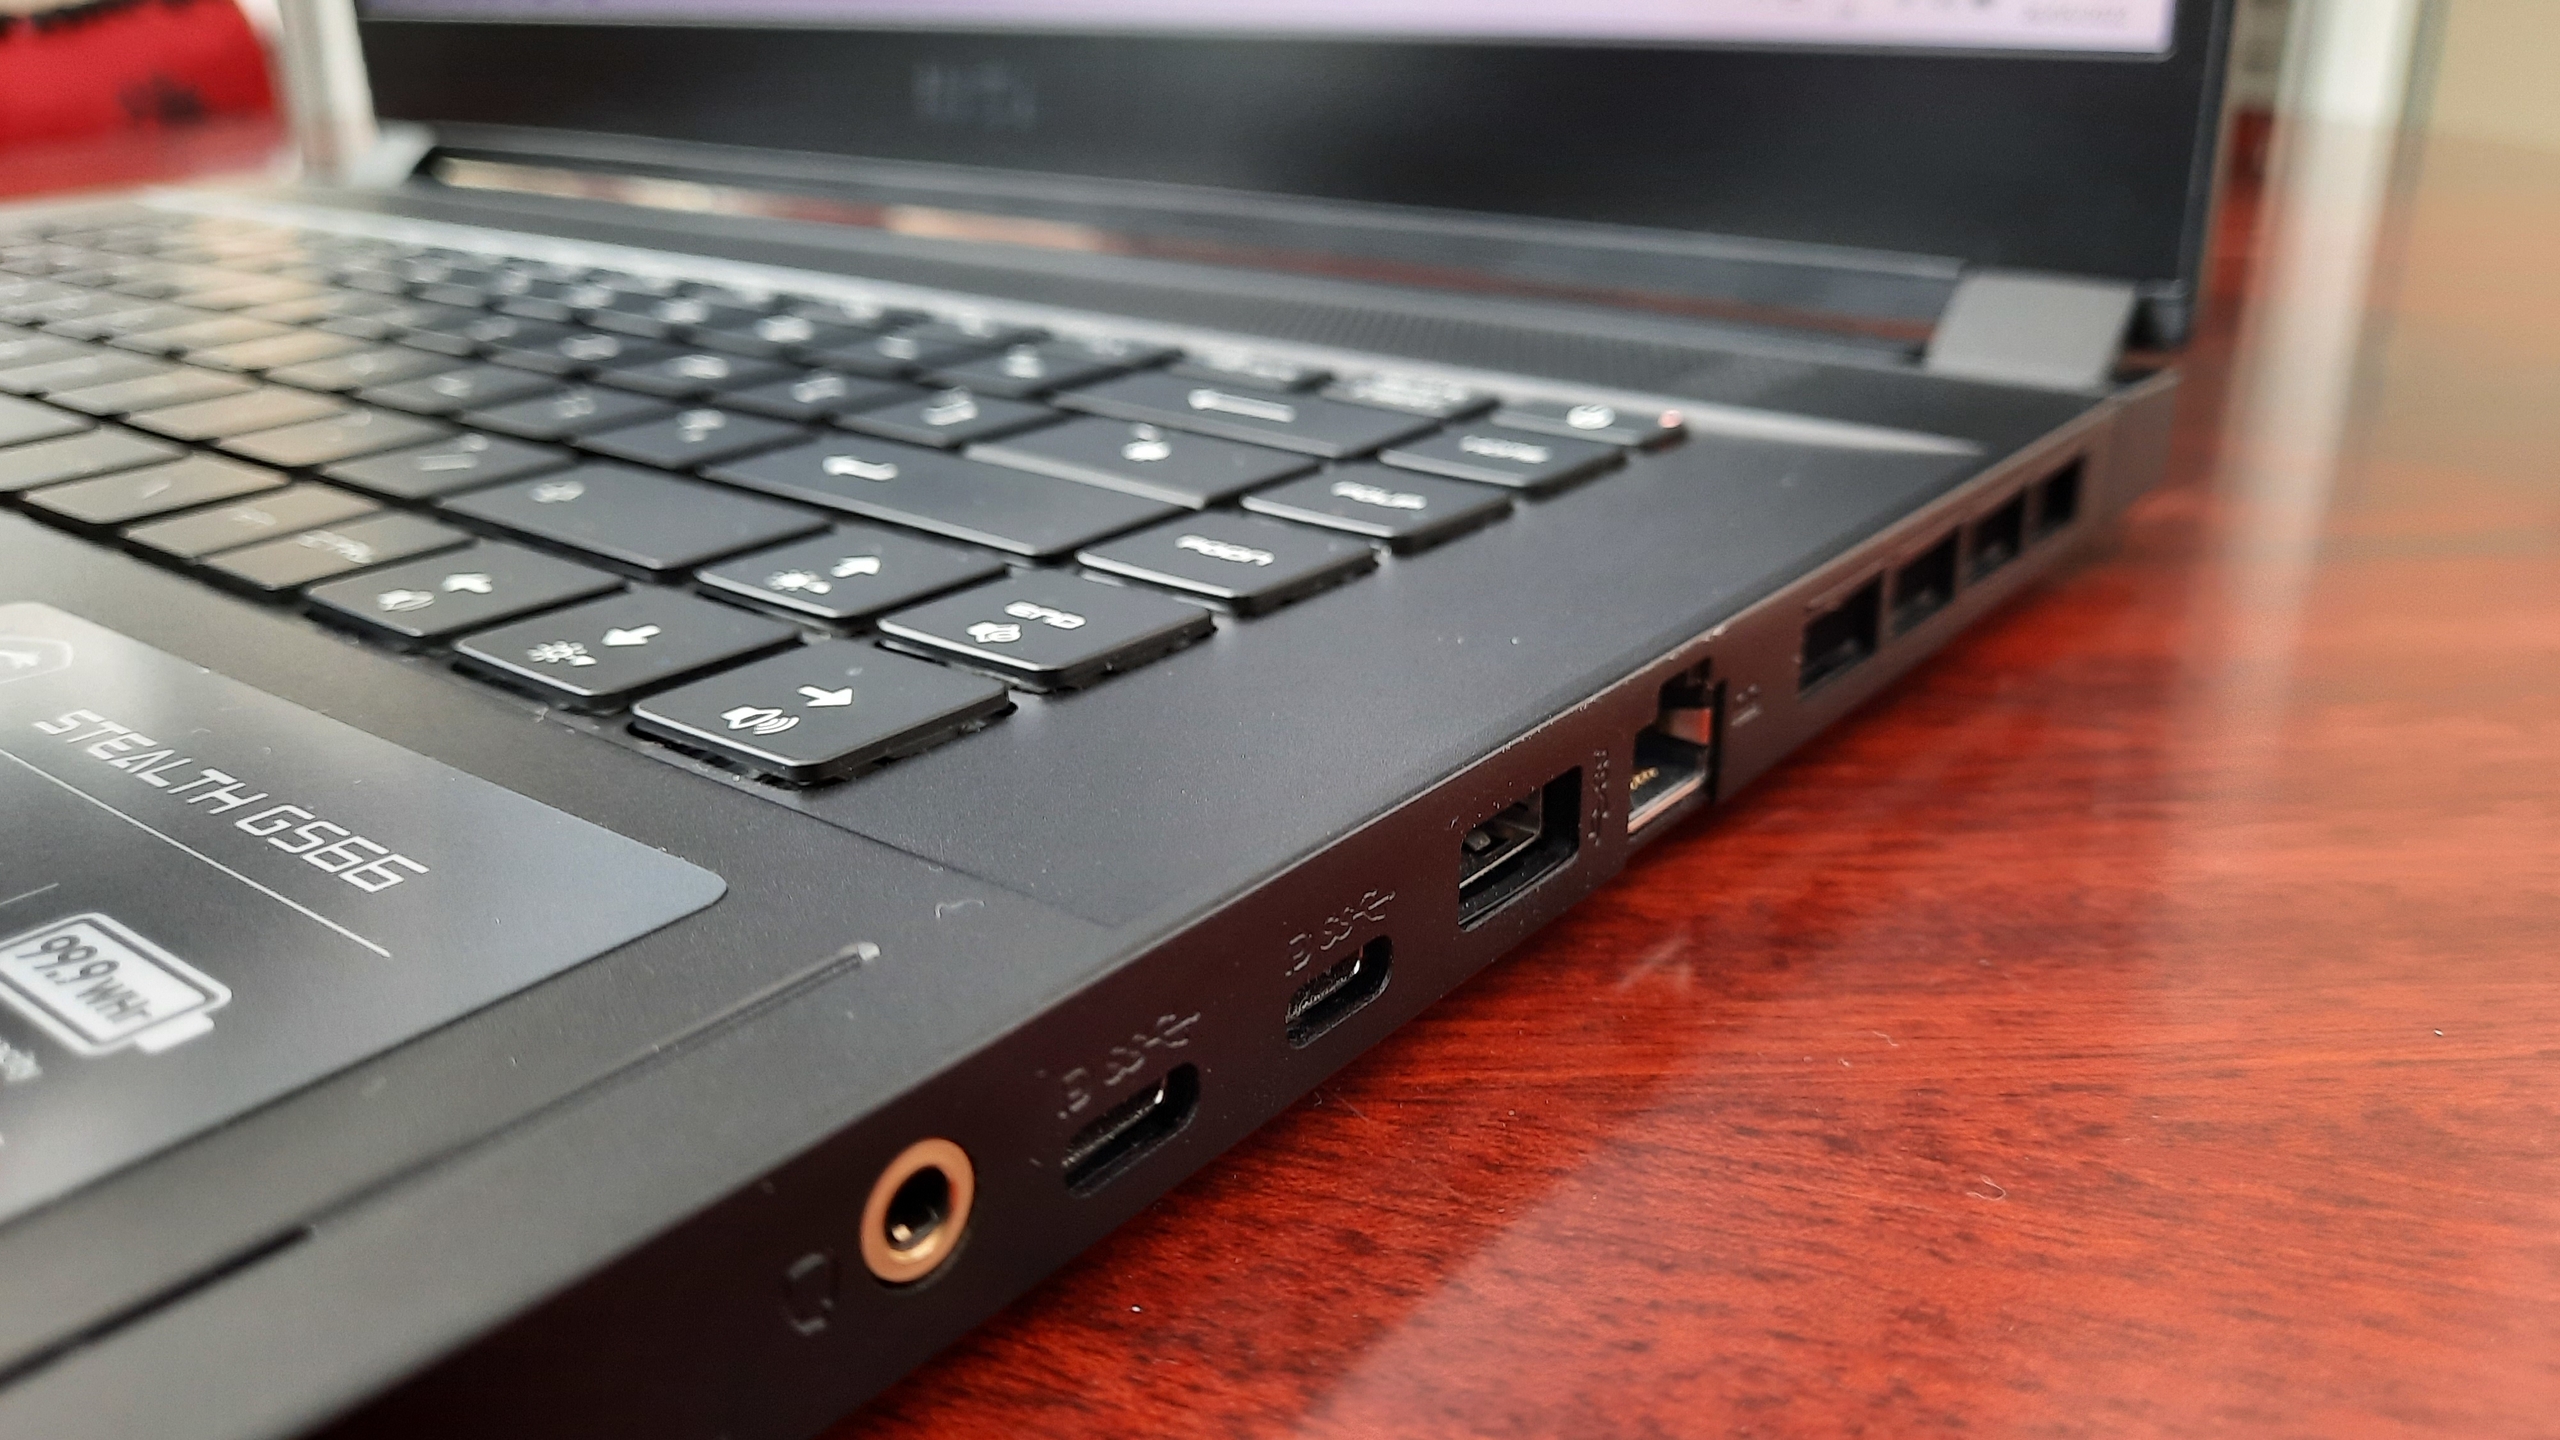 The ports located on the right-hand side of the MSI Stealth GS66 12UGS